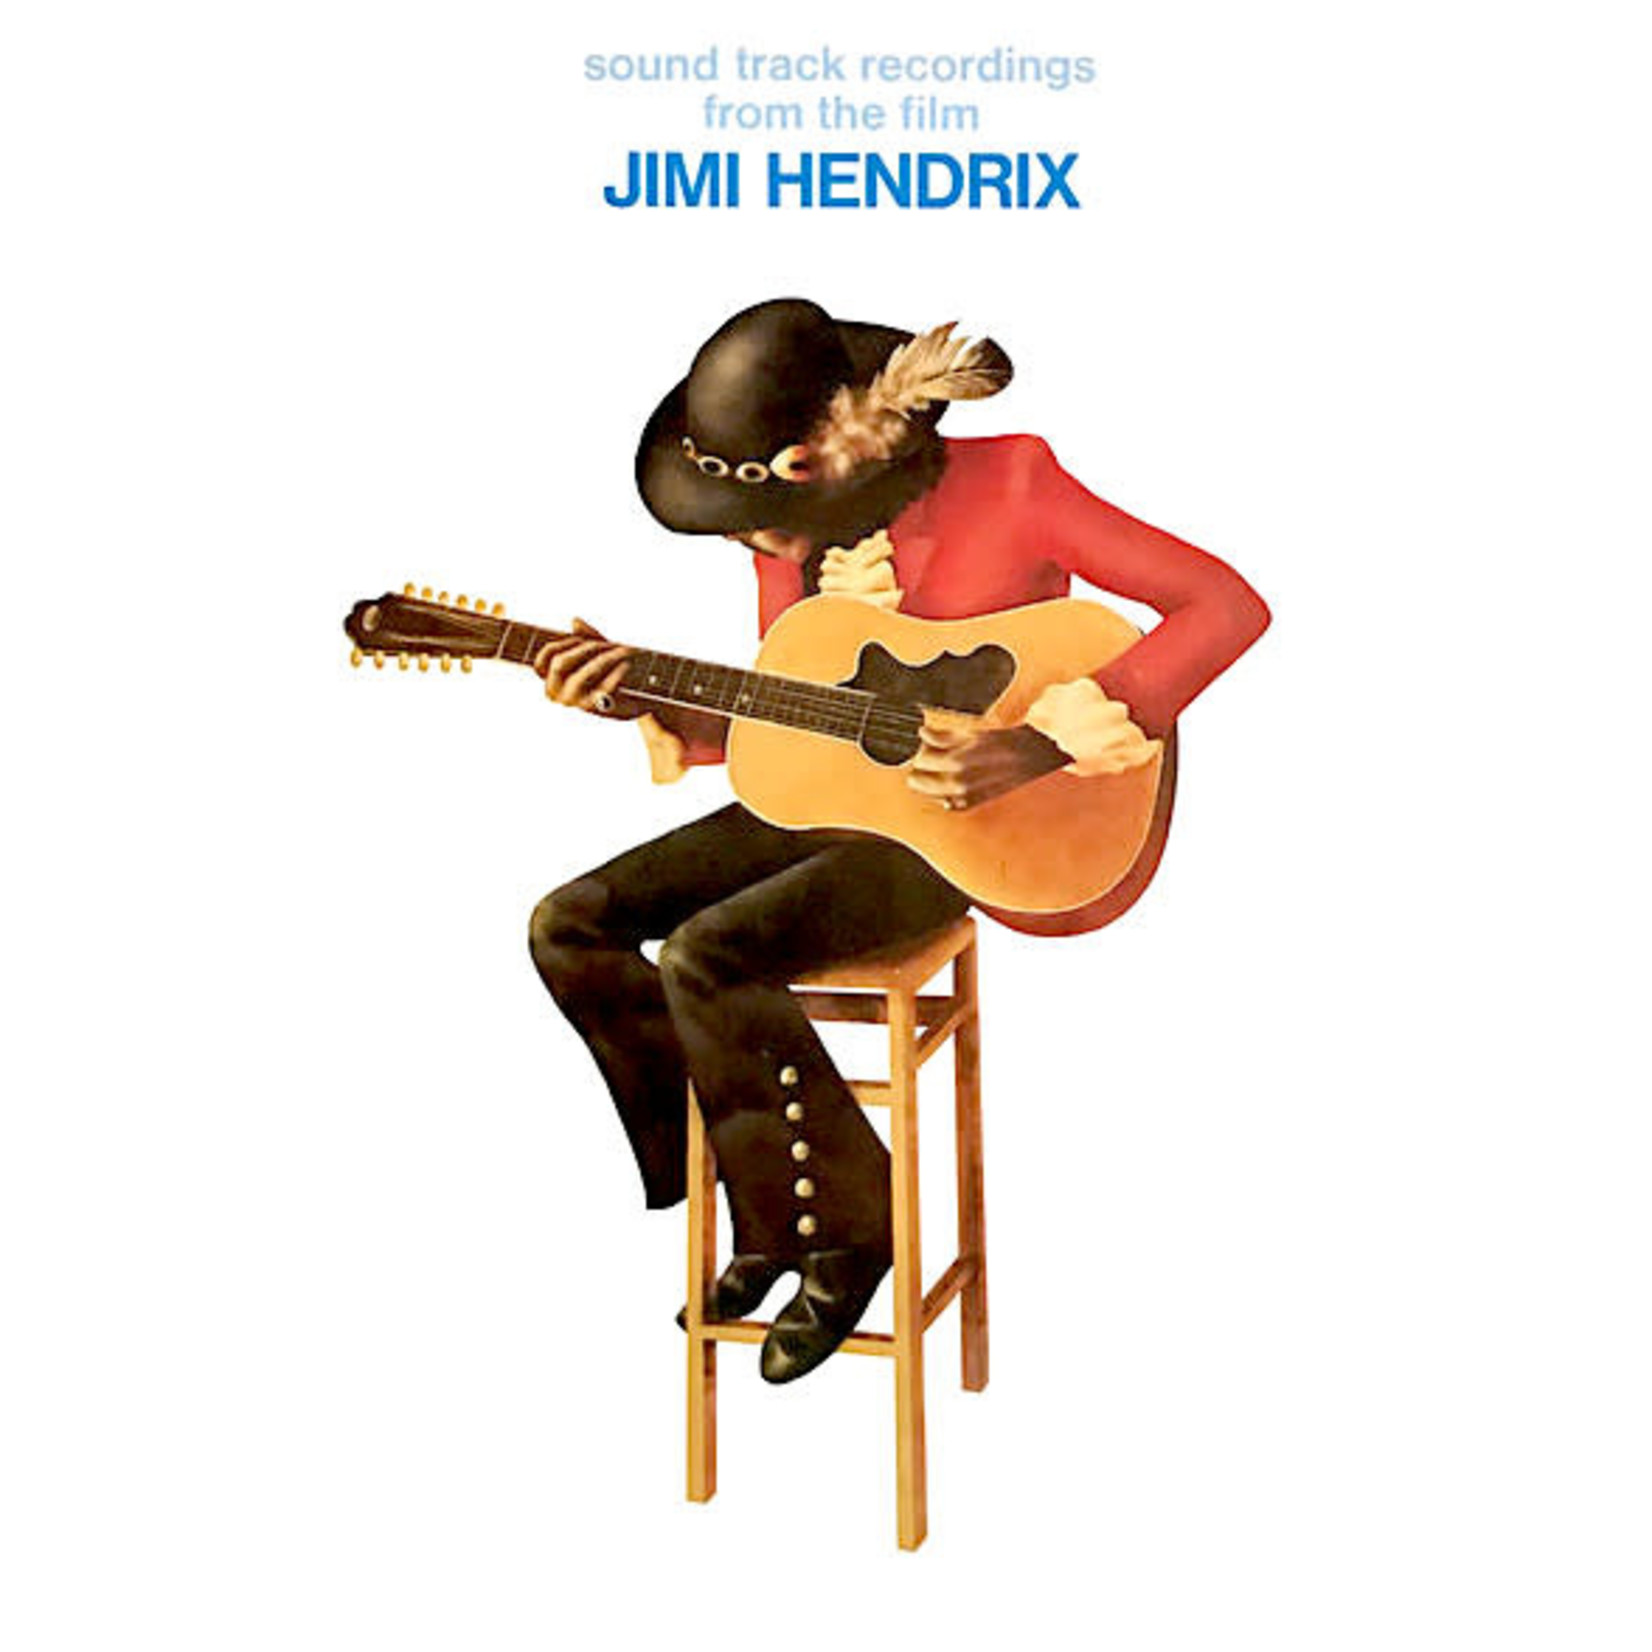 [Vintage] Jimi Hendrix - Sound Track Recordings From the Film (2LP)